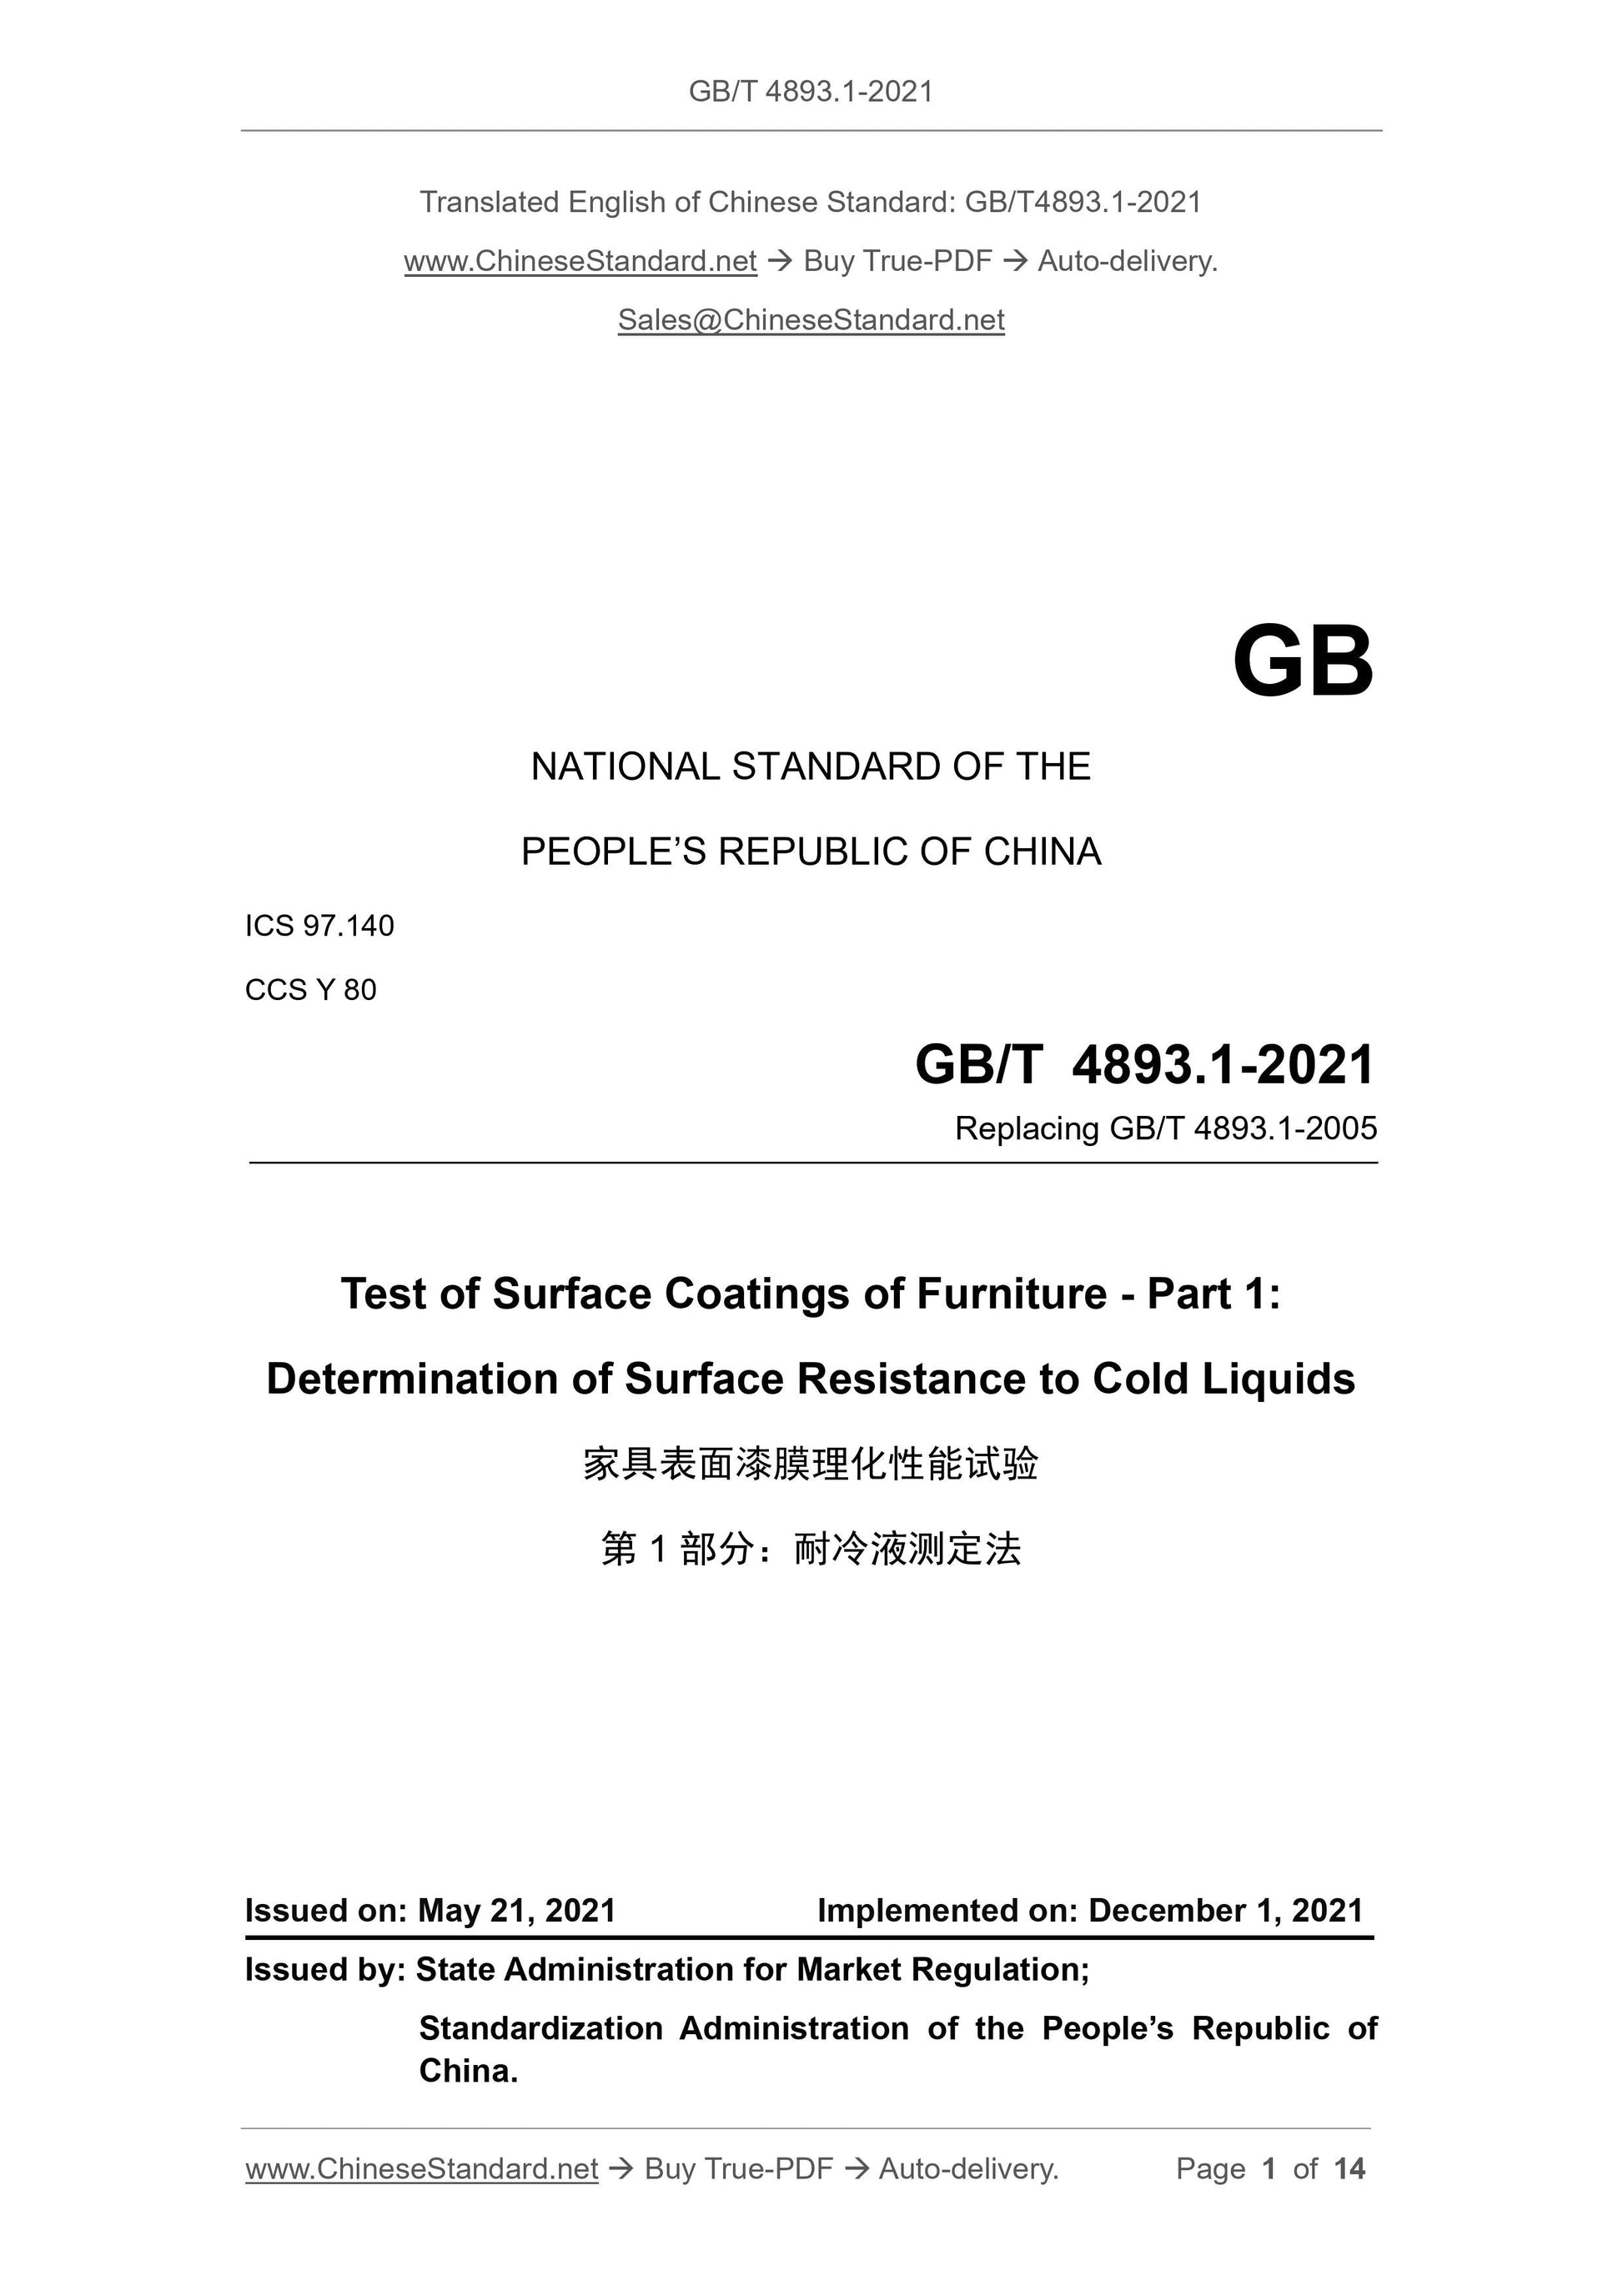 GB/T 4893.1-2021 Page 1